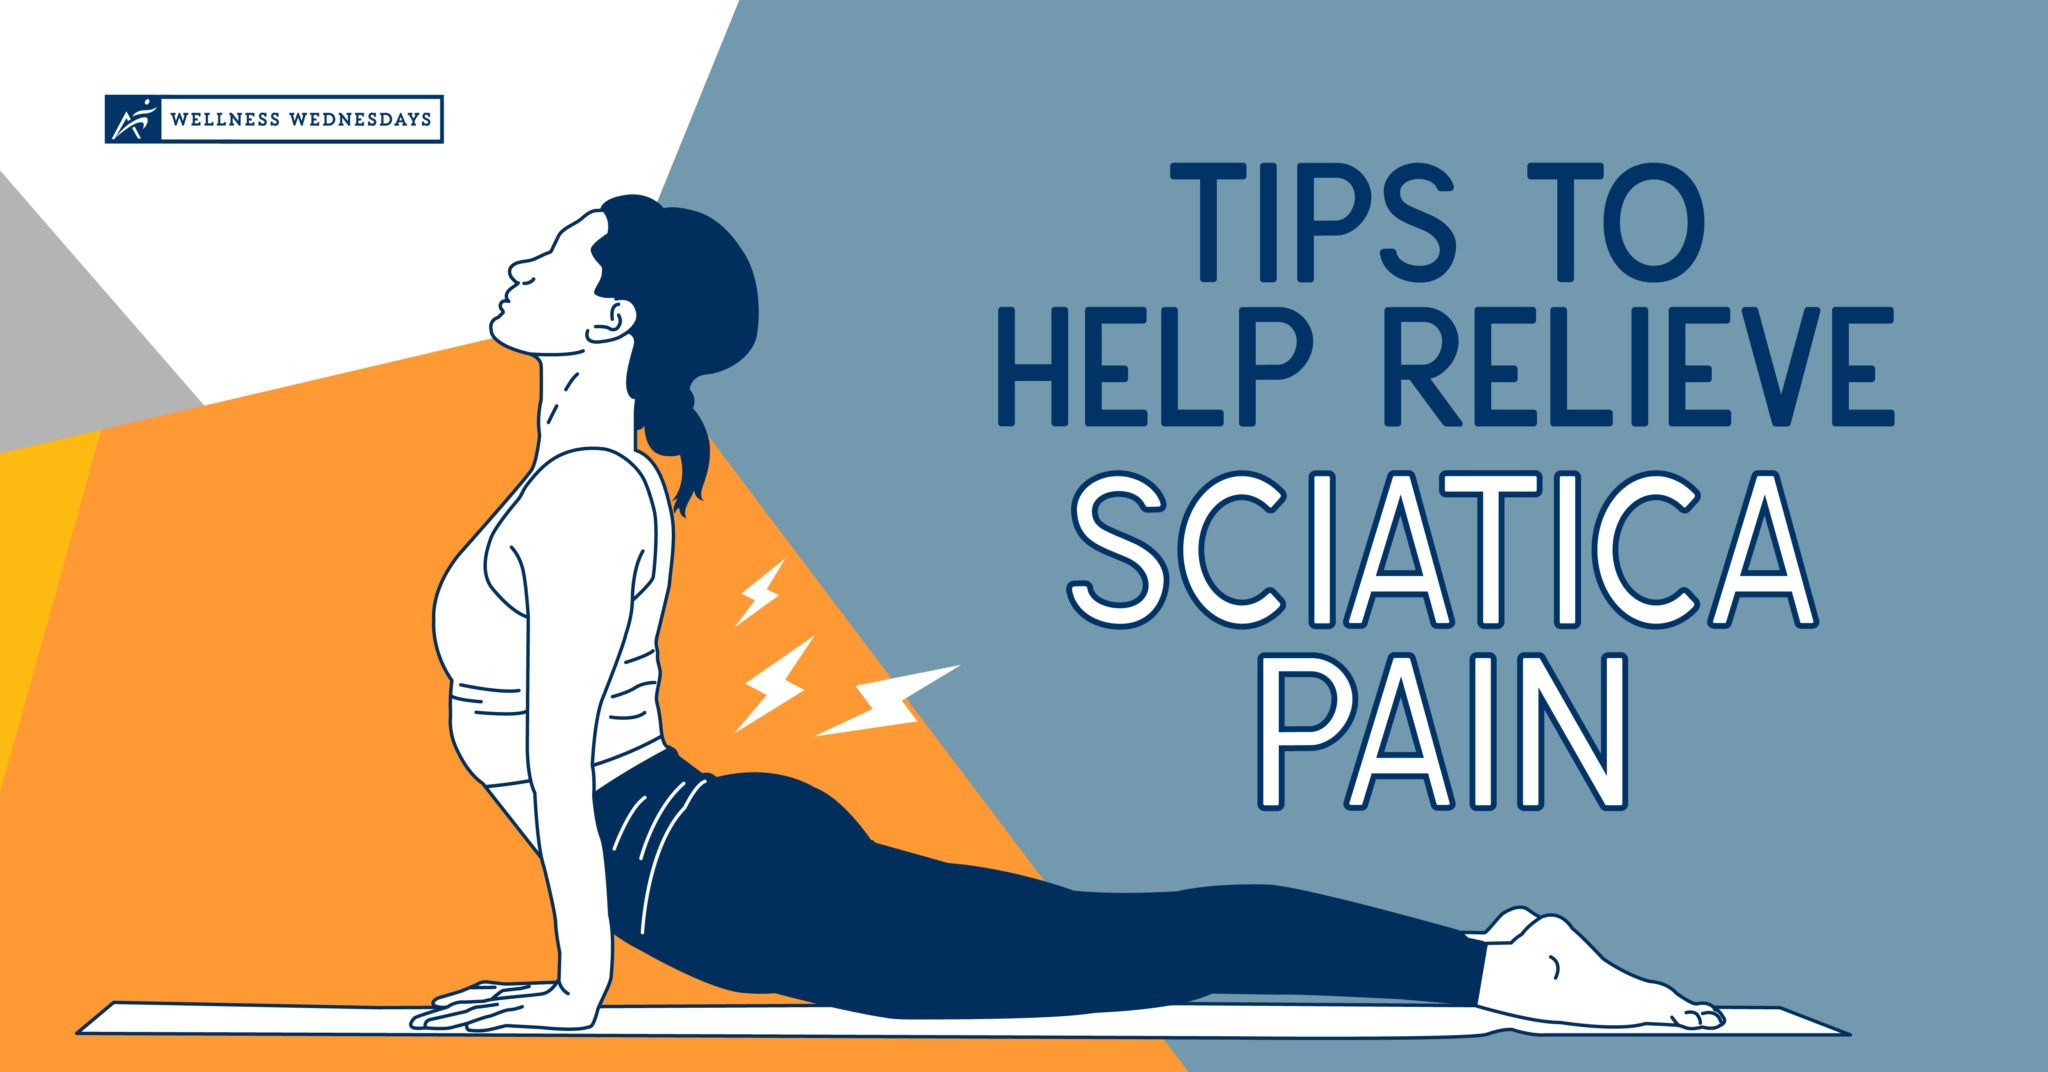 https://www.airrosti.com/wp-content/uploads/2019/04/2021_06_-Tips-to-Relieve-Sciatica-2_353921-Blog-scaled.jpg